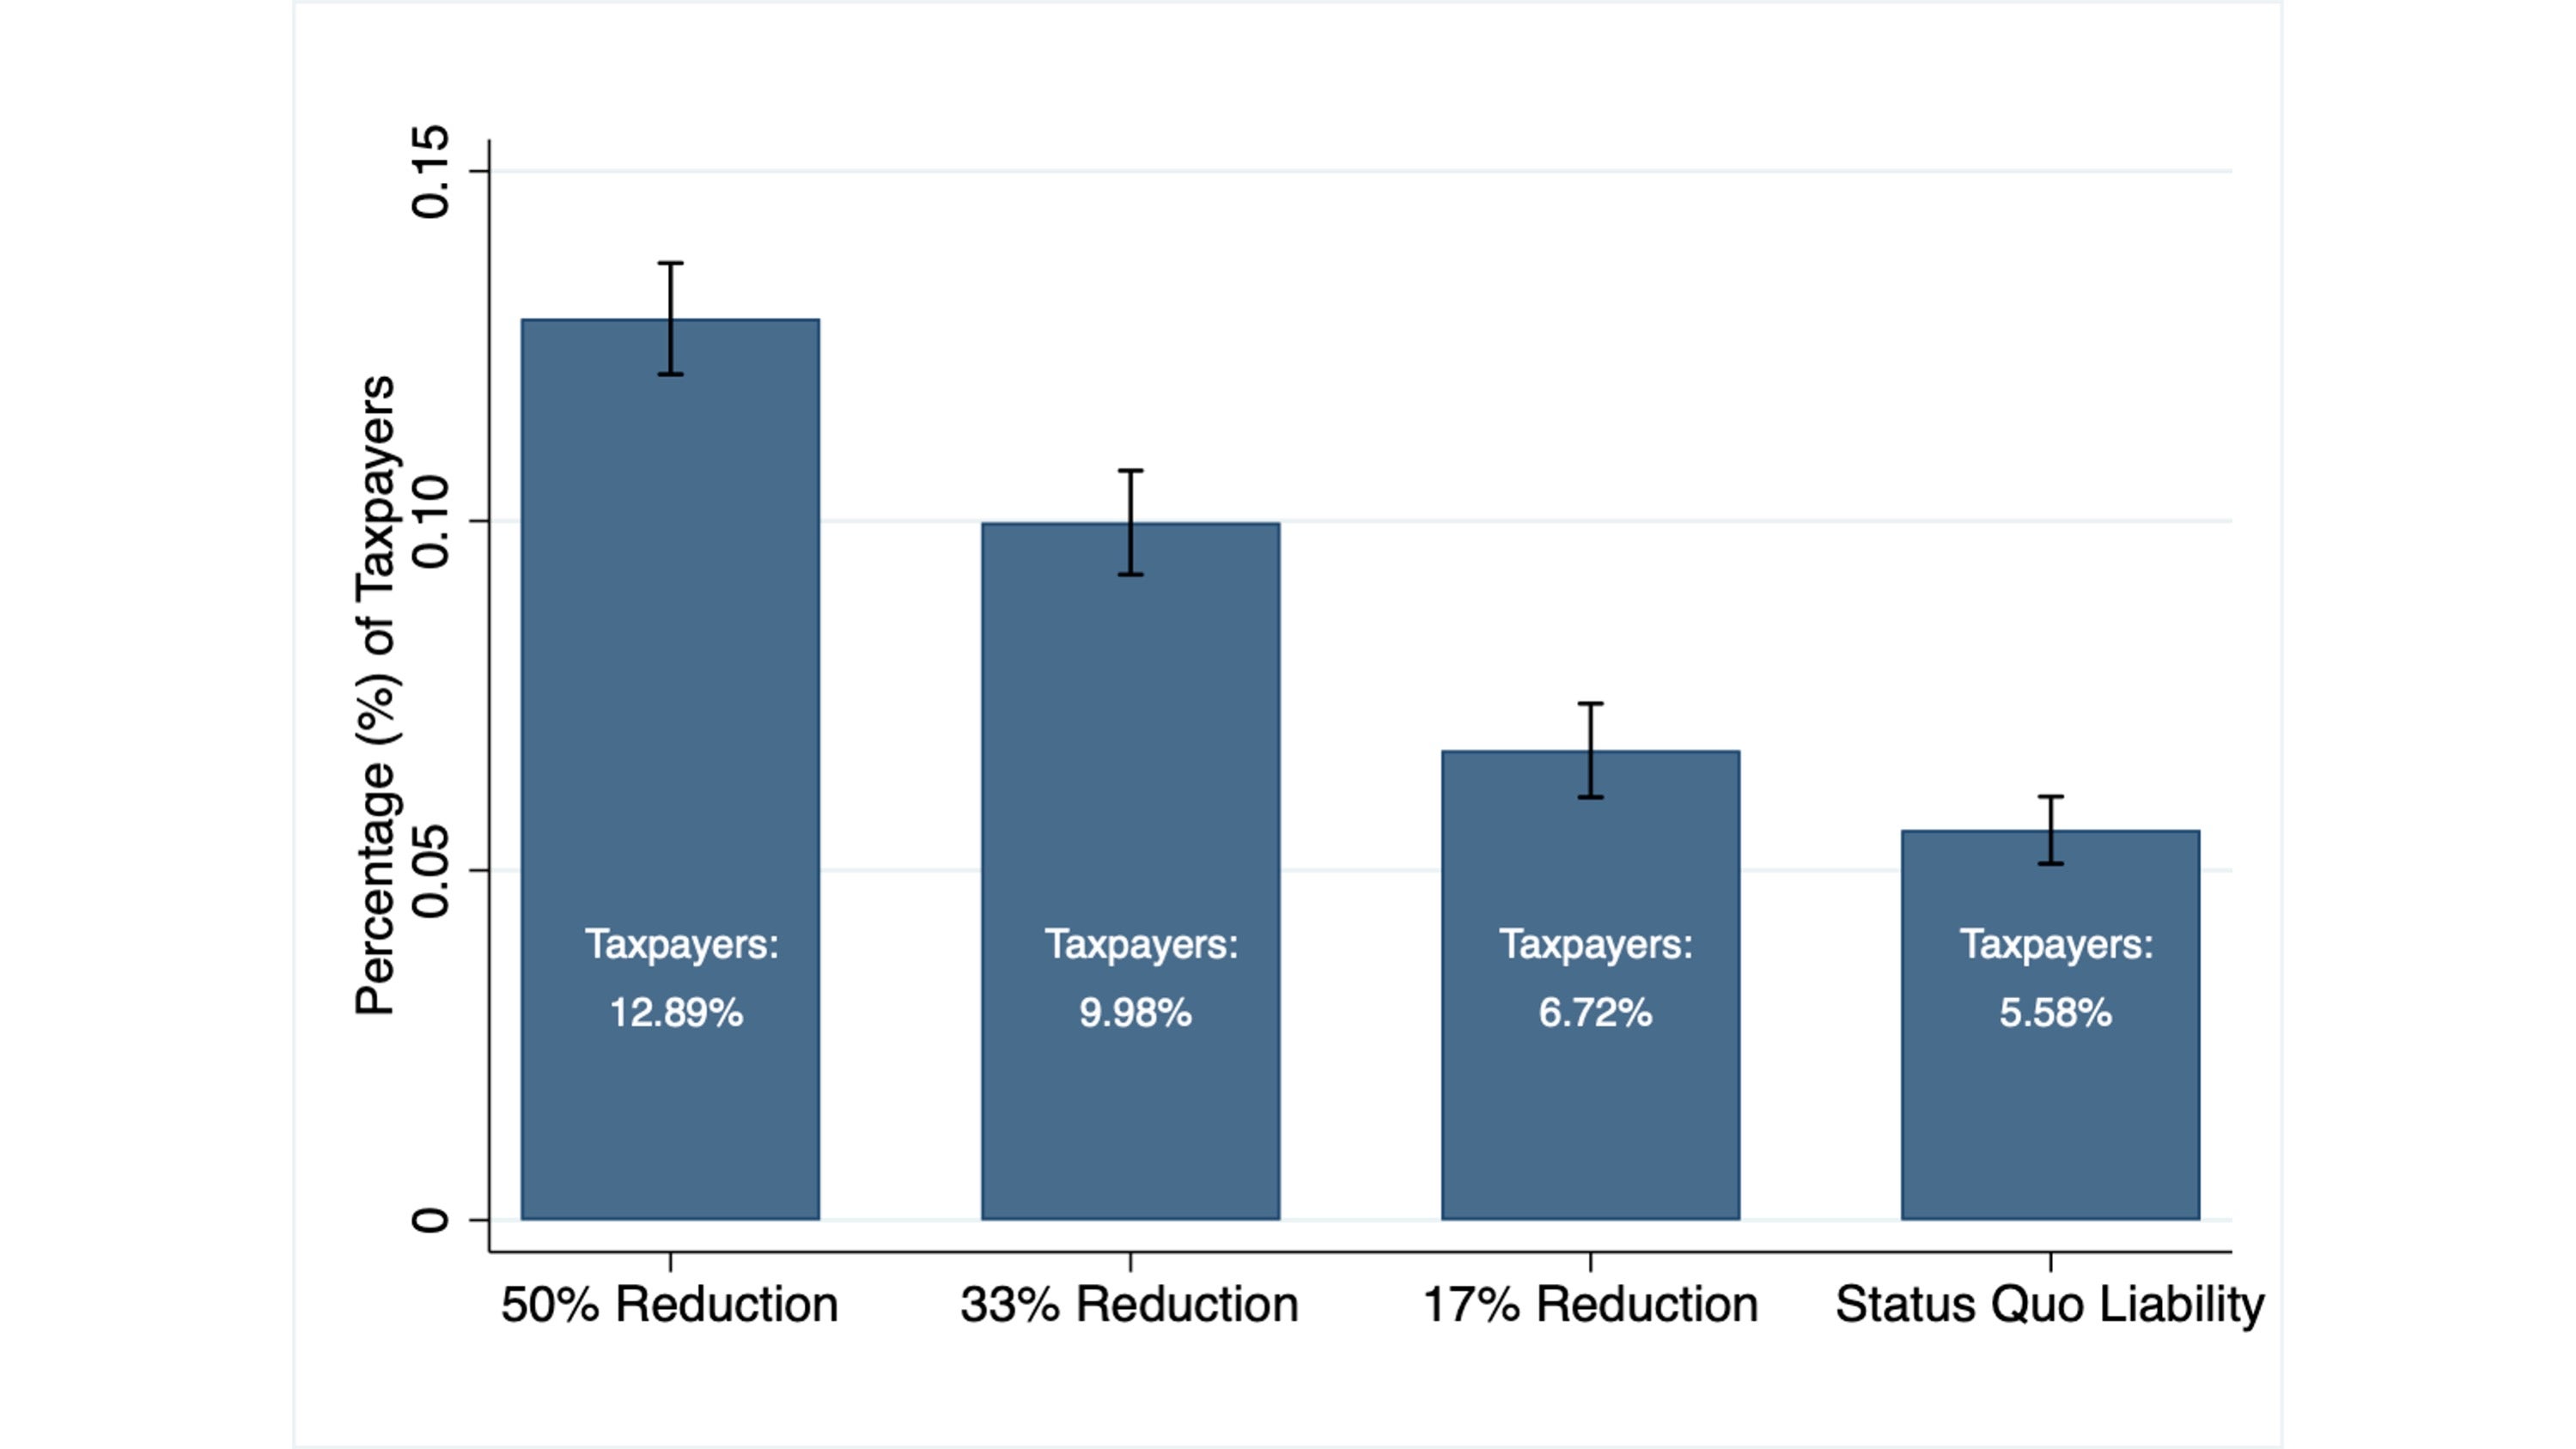 shows tax compliance rates with different subsidies